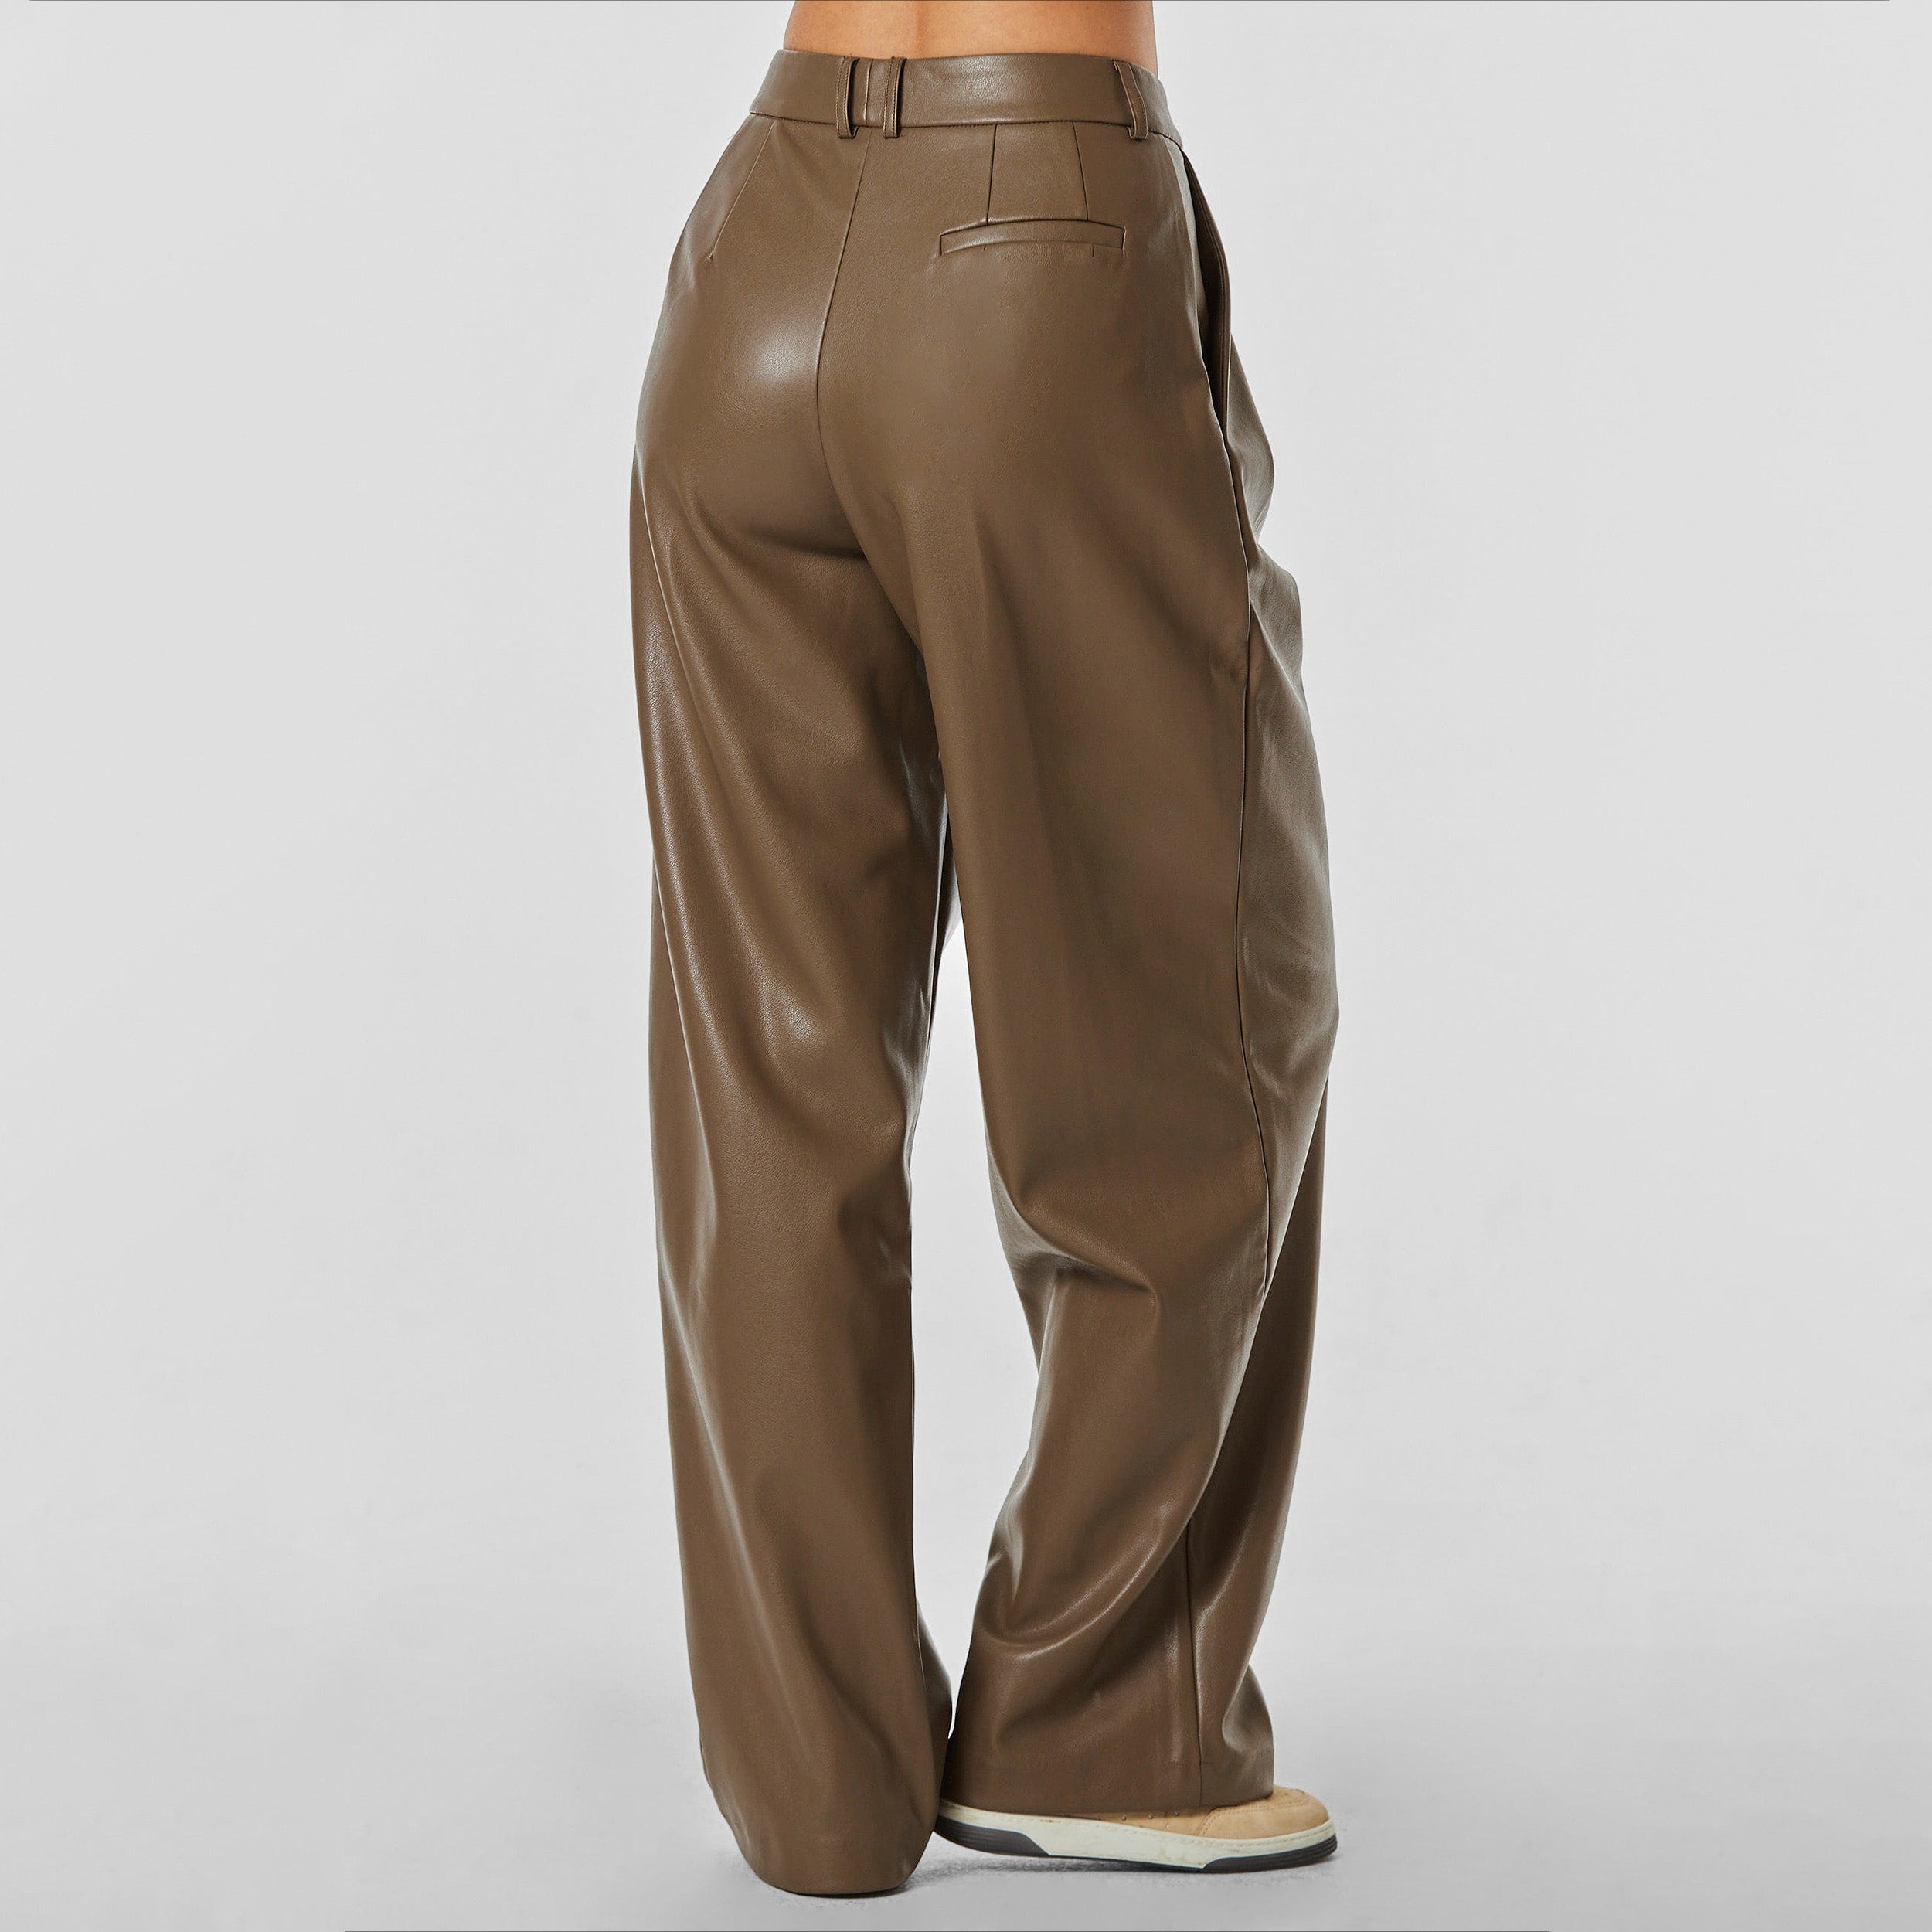 Rear view of woman wearing brown high rise vegan leather pleated trousers.